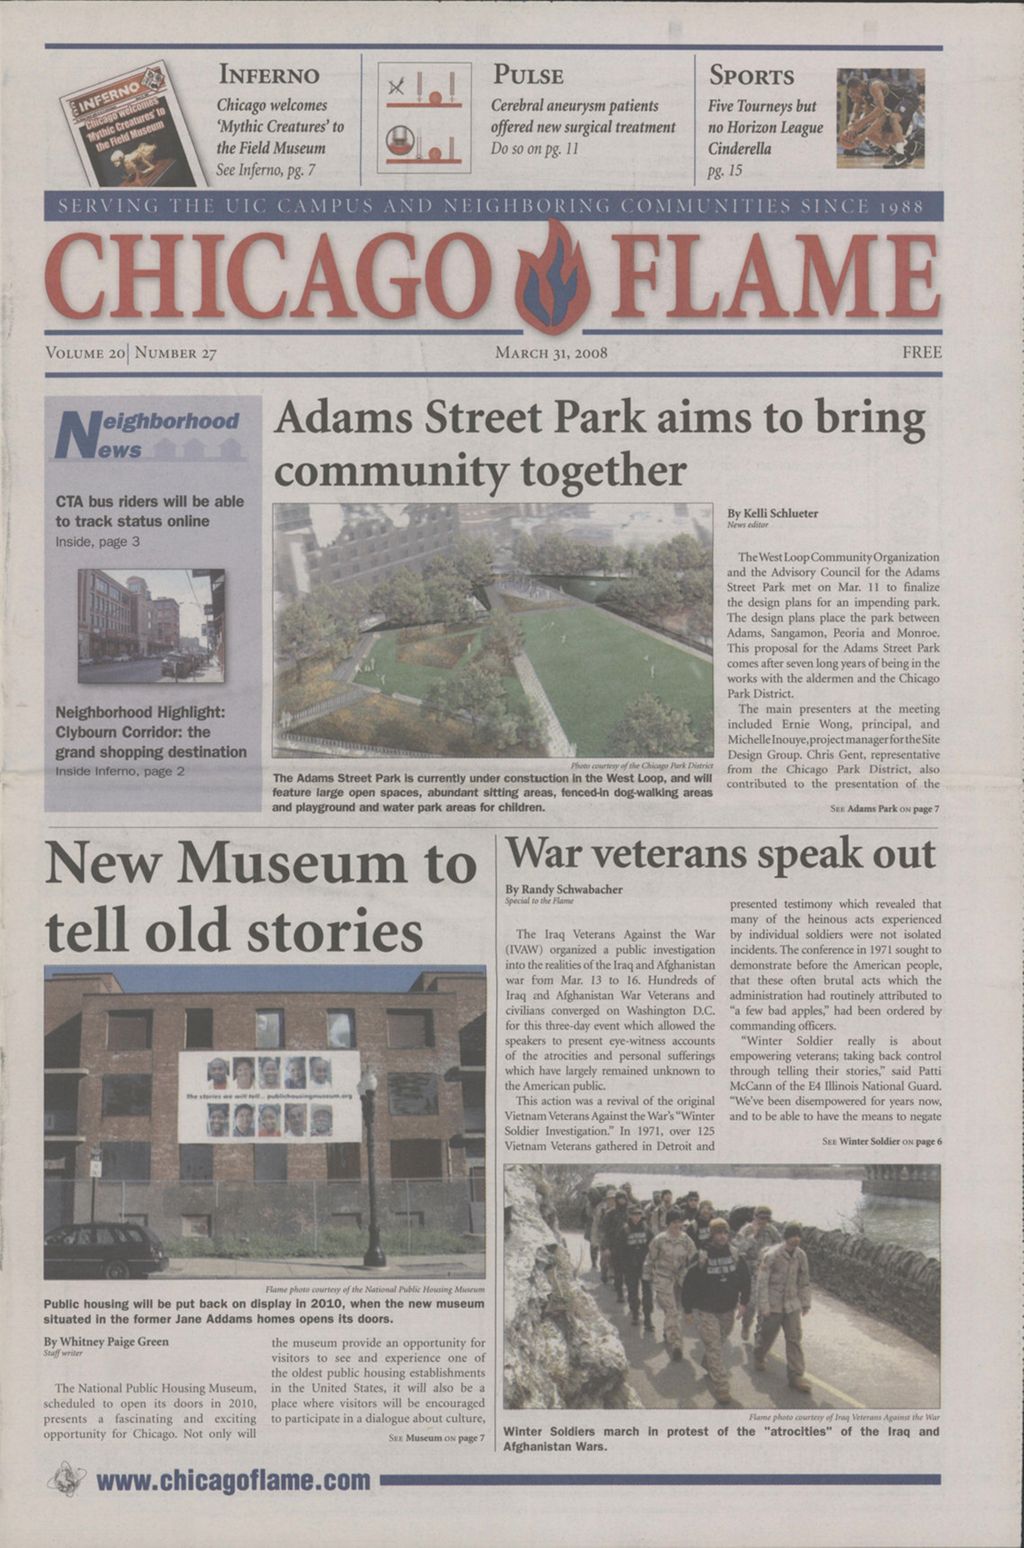 Miniature of Chicago Flame (March 31, 2008)